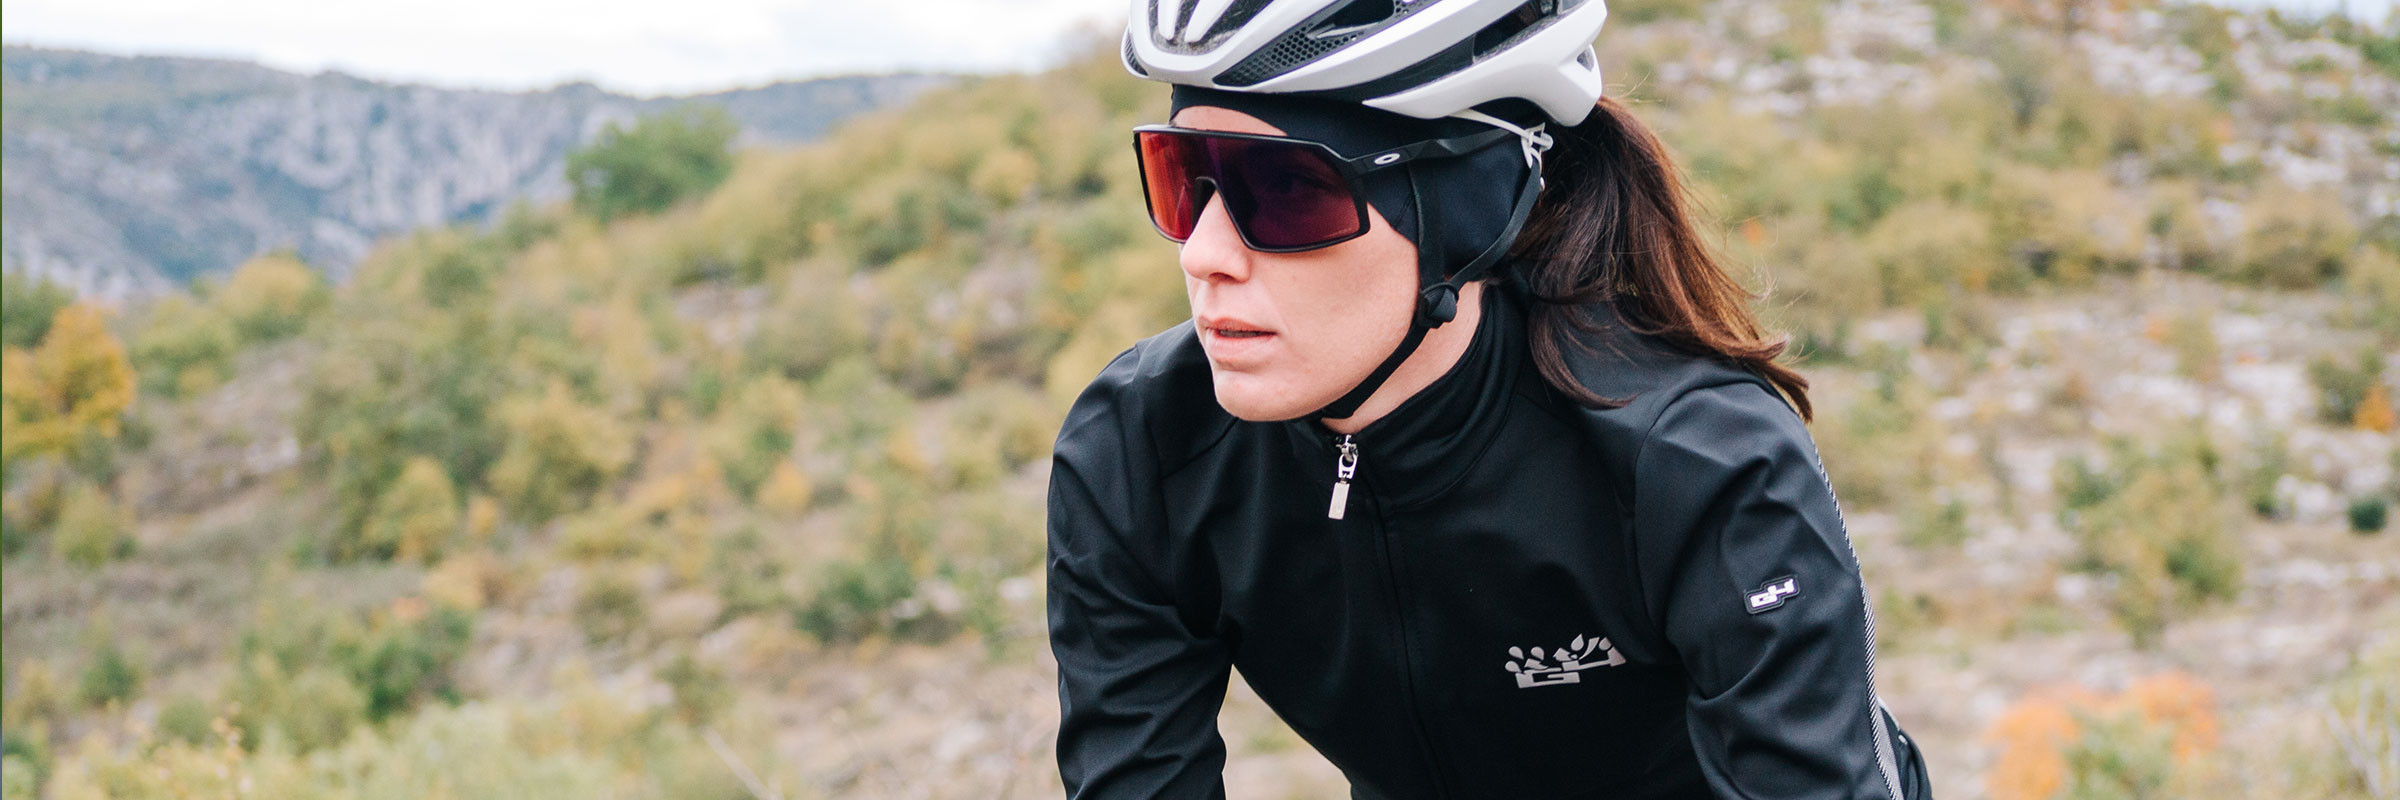 Weather protection for women cyclists